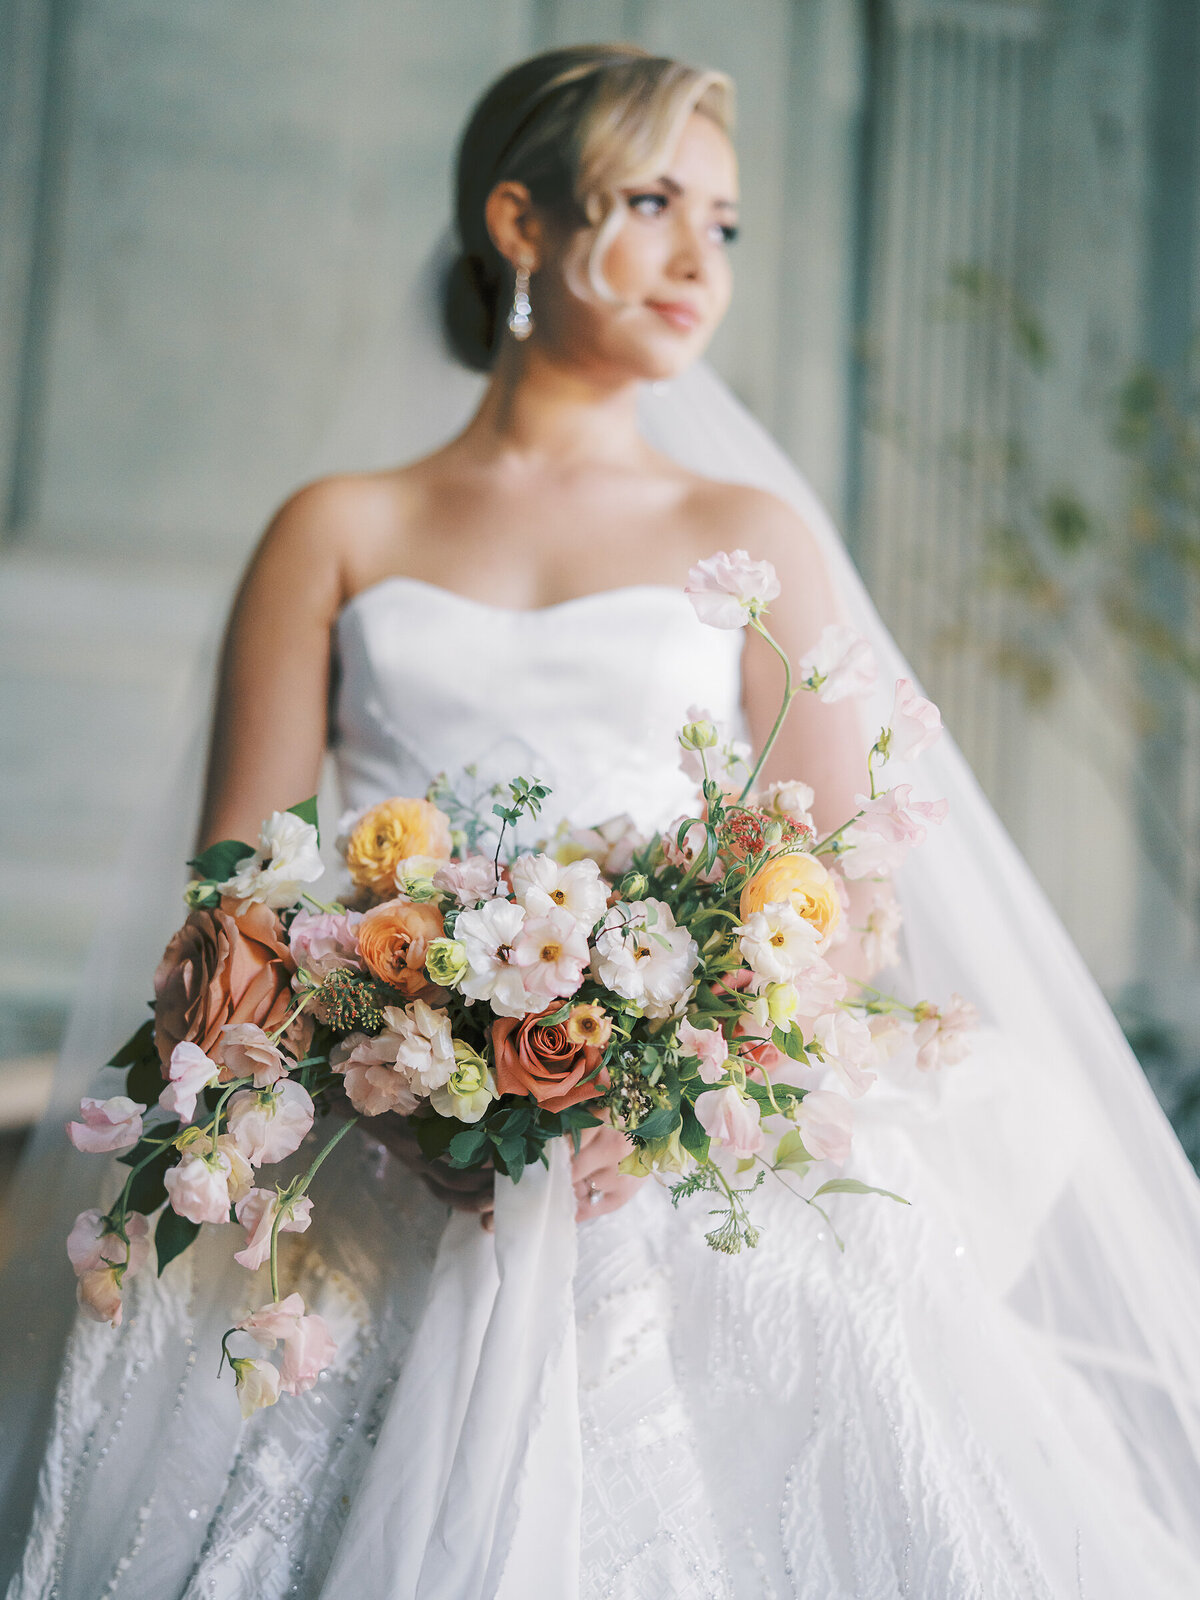 Jenny-Haas-Photography-Luxury-DC-Planner-Prof-Jimmy-Choo-Wedding-Gown-Luxe-Bridal-Bouquet-3